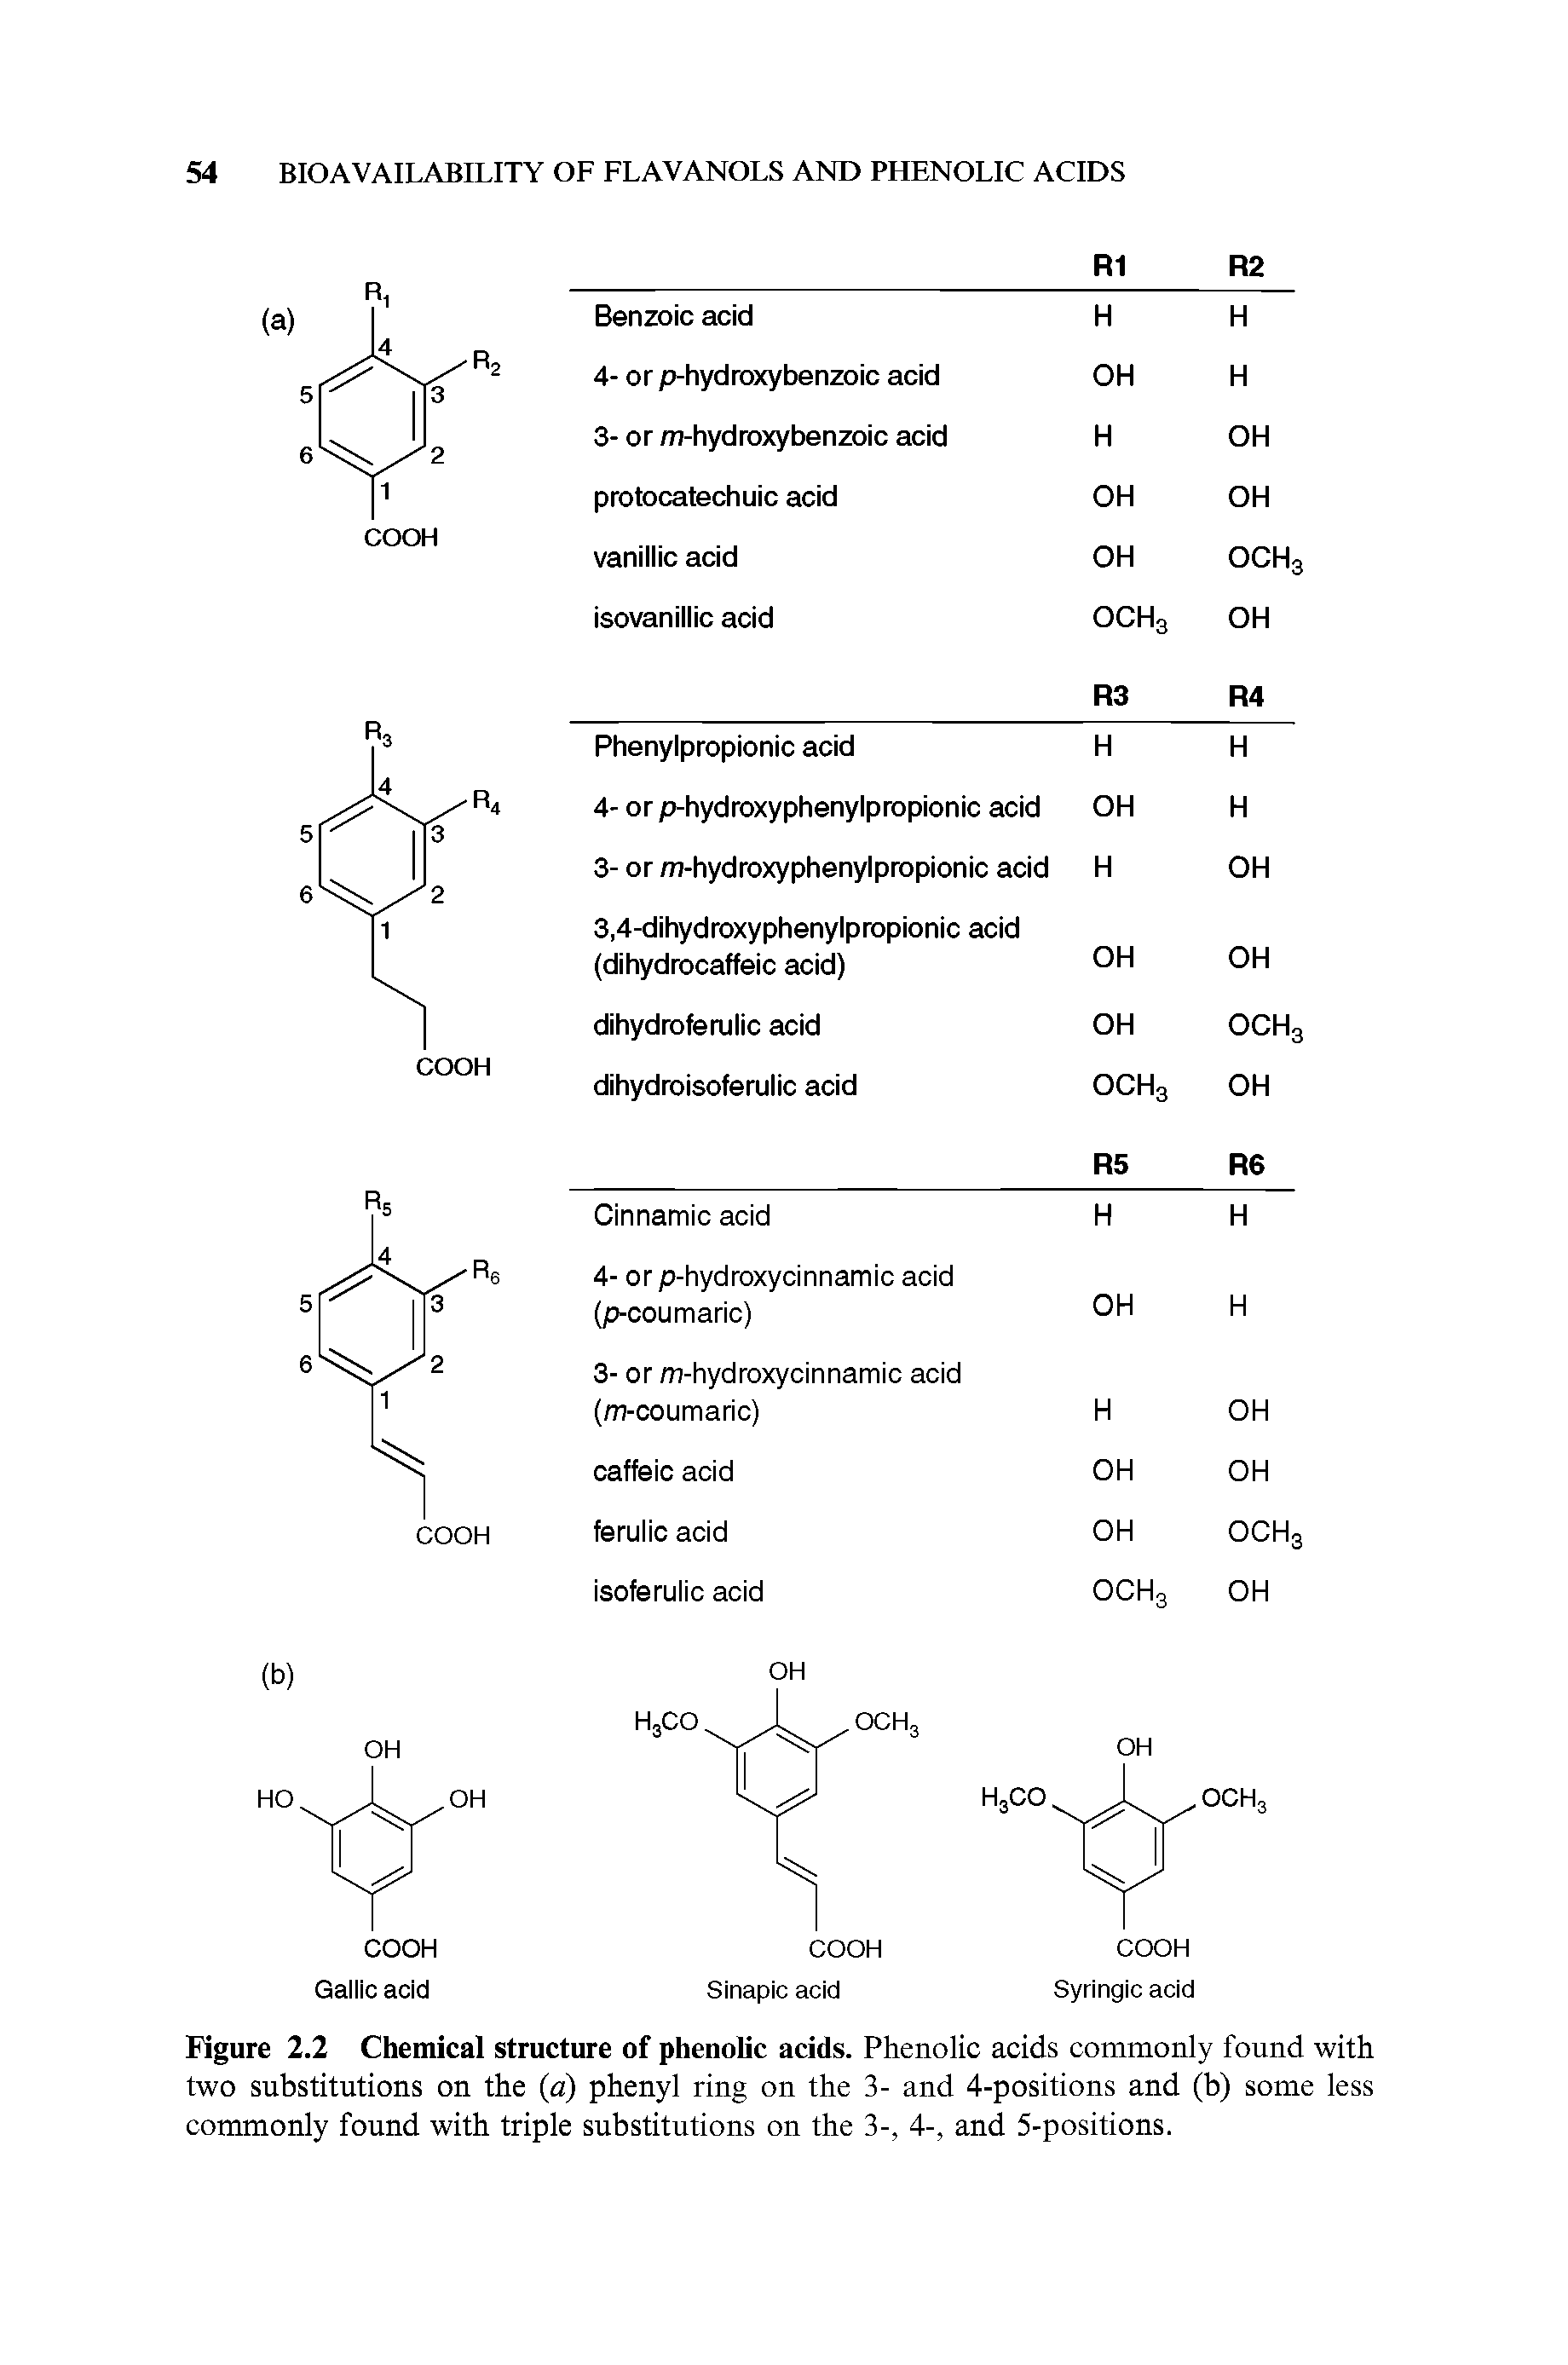 Figure 2.2 Chemical structure of phenolic acids. Phenolic acids commonly found with two substitutions on the (a) phenyl ring on the 3- and 4-positions and (b) some less commonly found with triple substitutions on the 3-, 4-, and 5-positions.